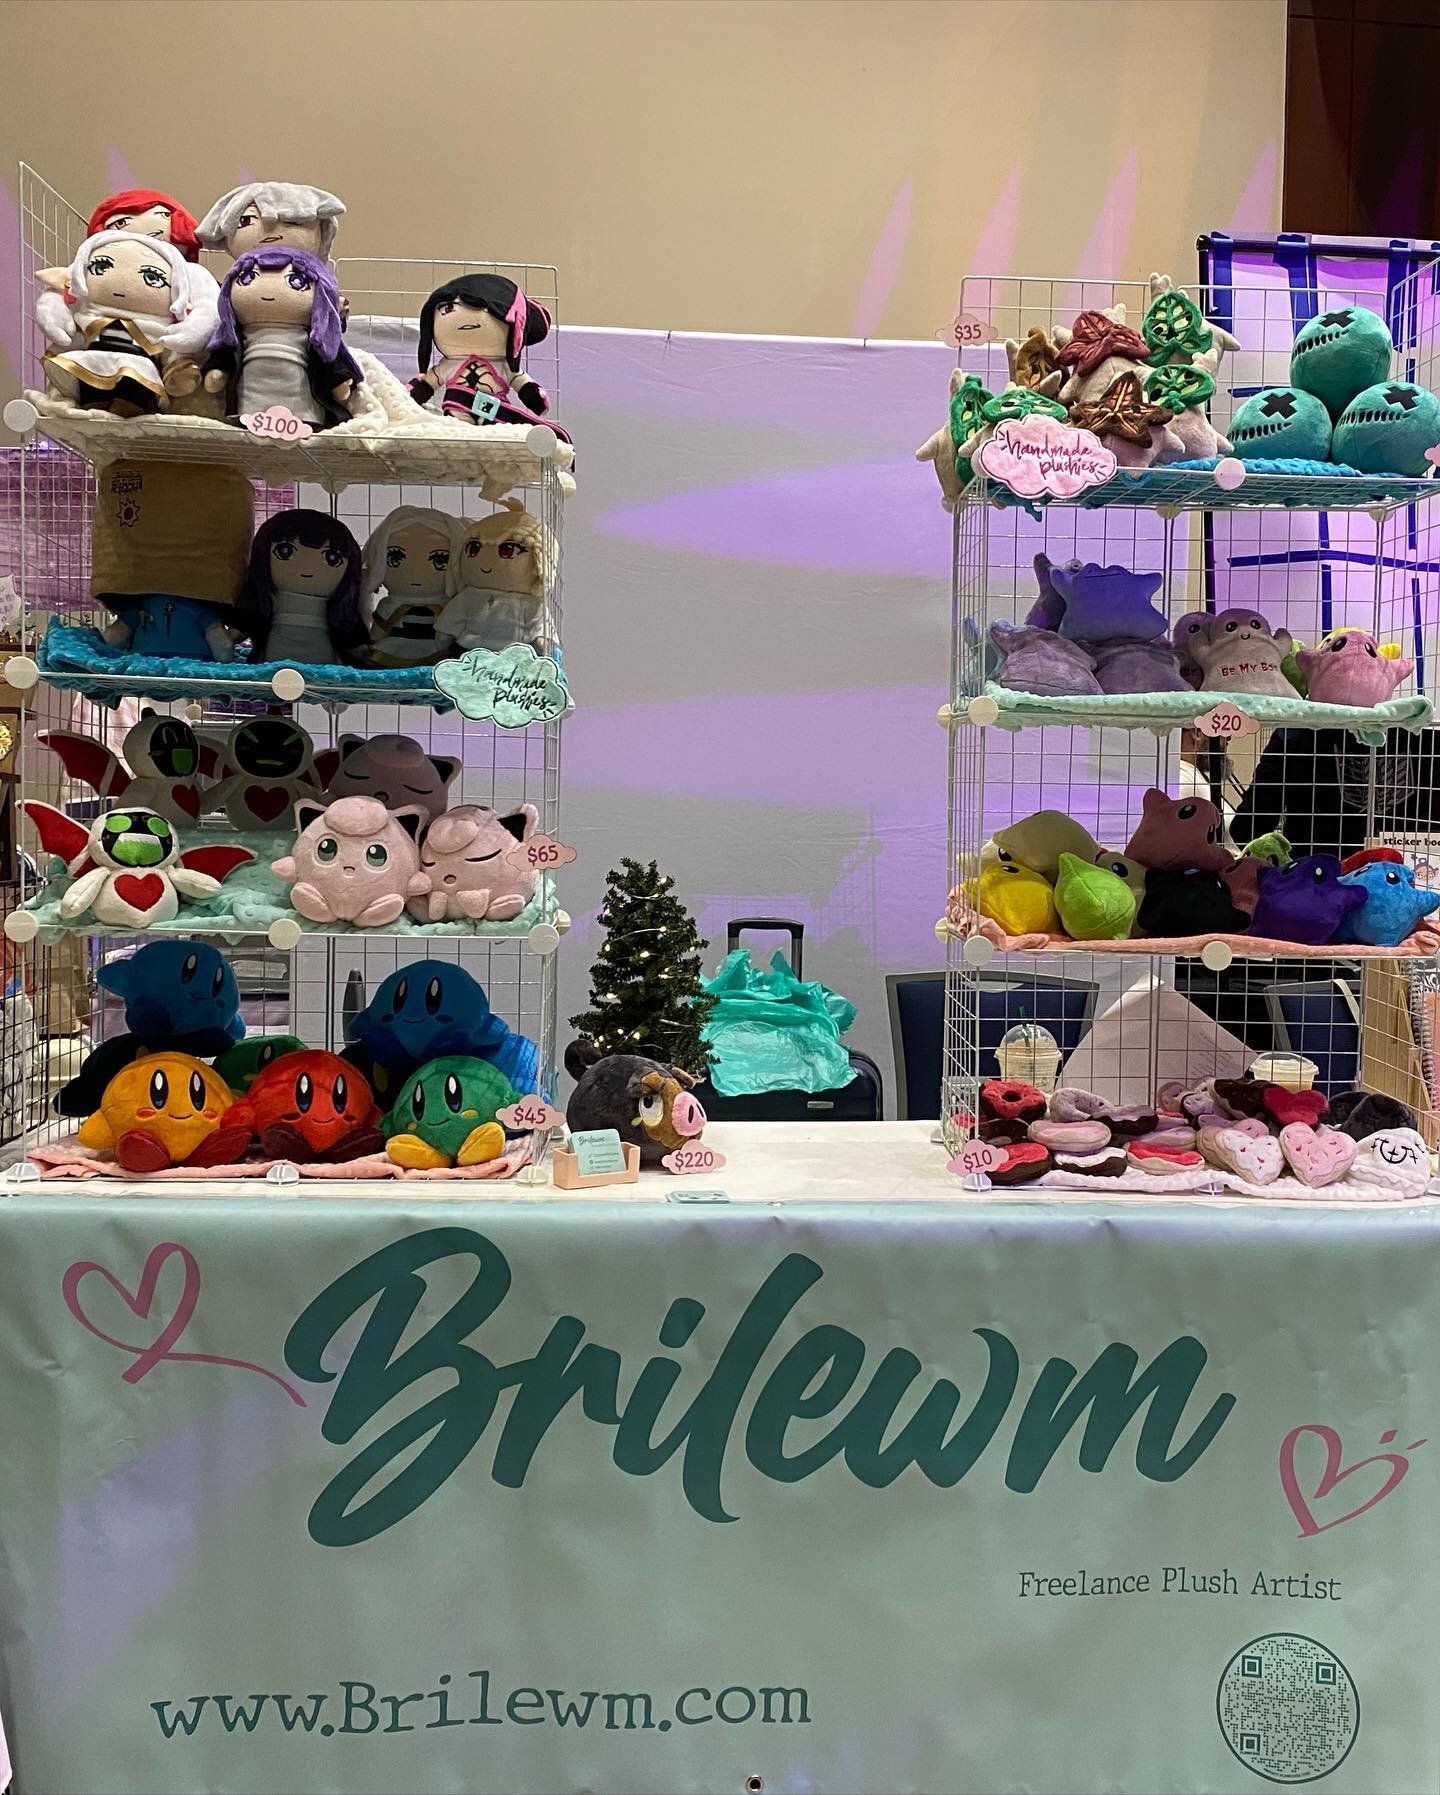 All set up for Otakufests holiday special event! I&rsquo;m in the Artist alley at booth C2!~

Come by and say hi if you&rsquo;re here 🥰

#otakufest #artistalley #plushies #artistalleytable #handmade